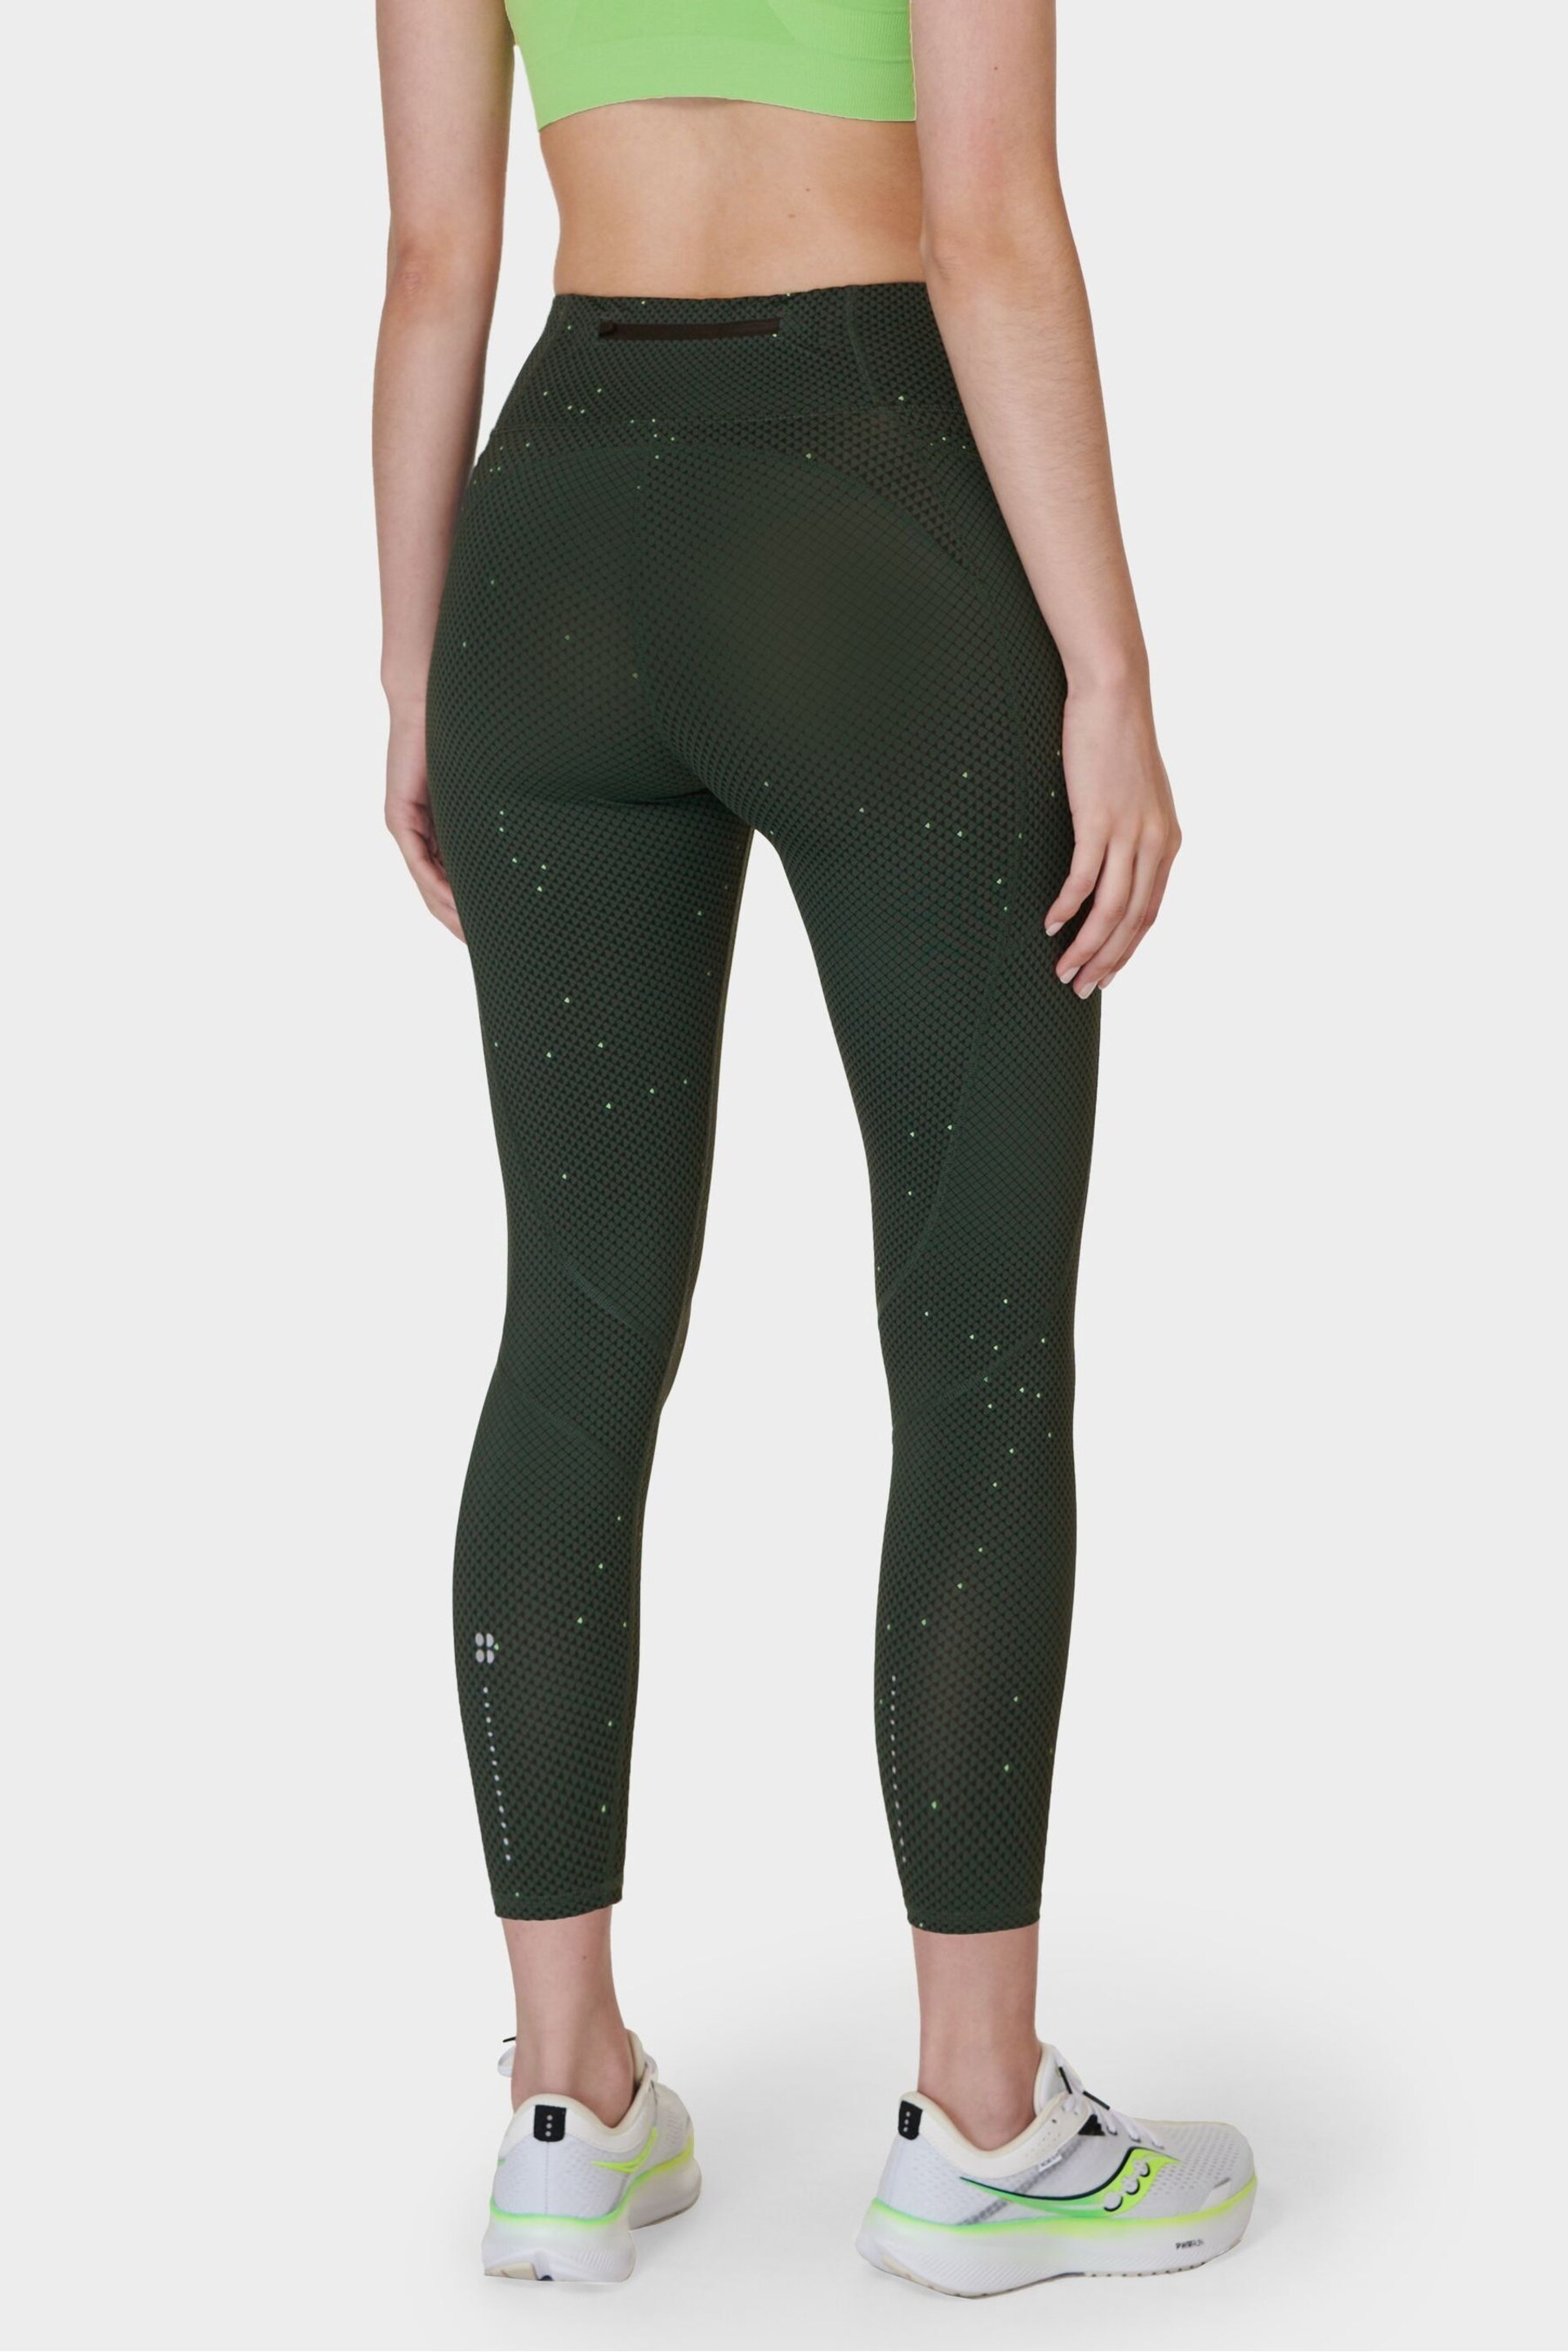 Sweaty Betty Green Grid Geo Print 7/8 Length Aerial Core Workout Leggings - Image 2 of 9